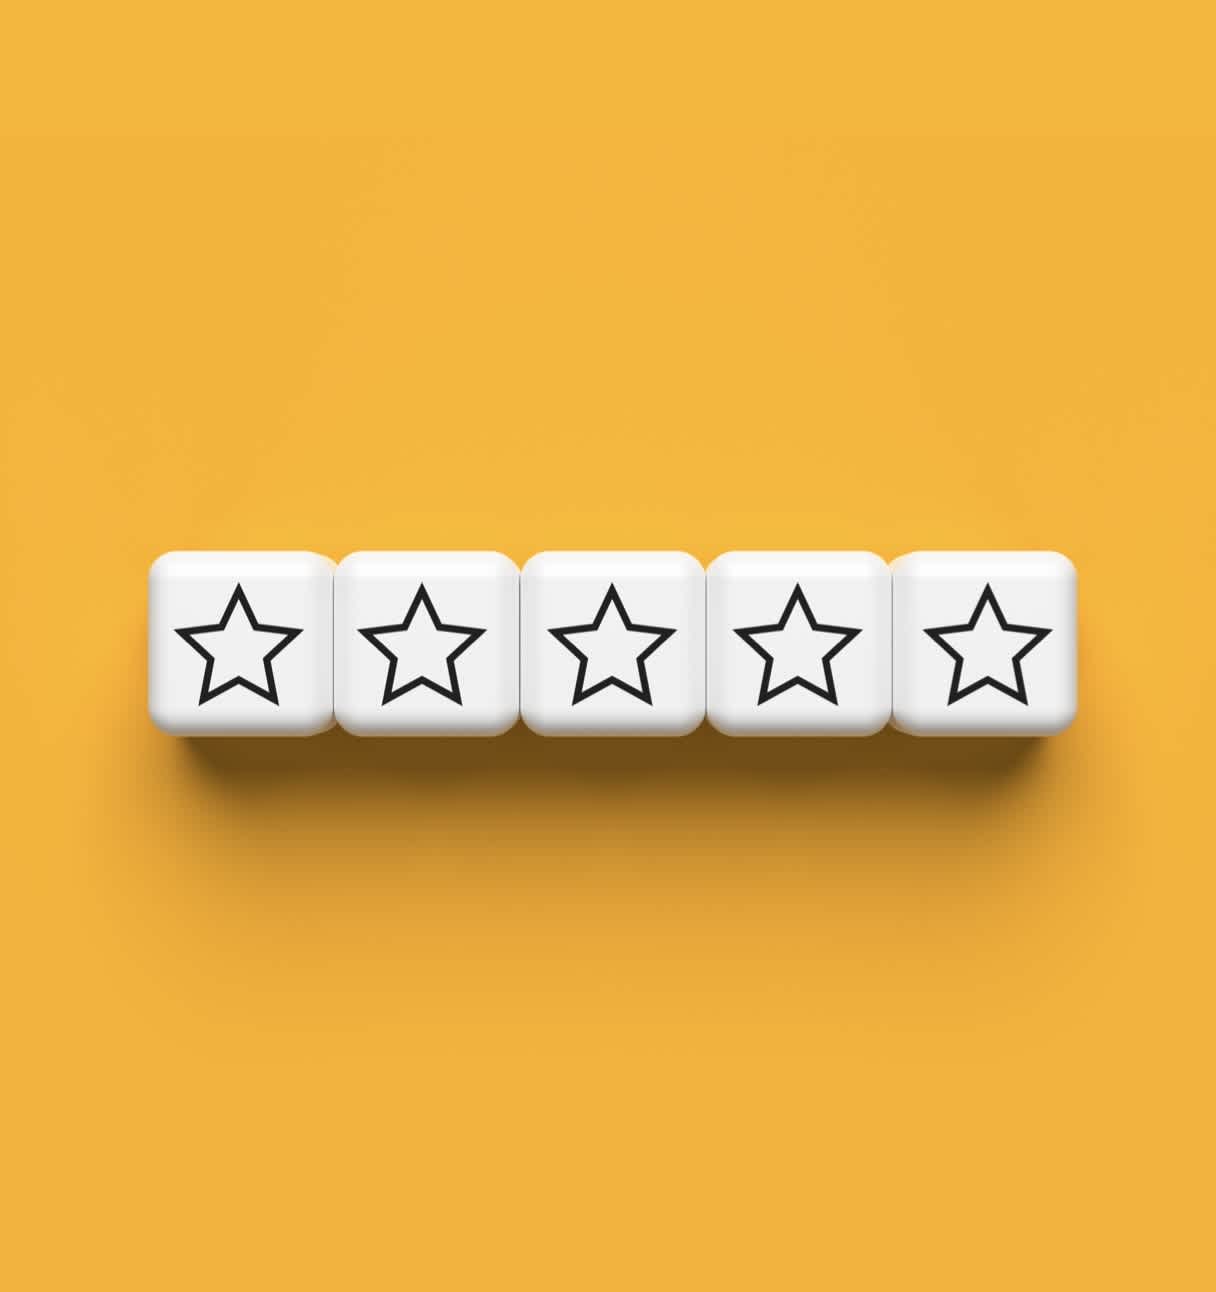 Ratings Stars on Yellow Background (Top Block)